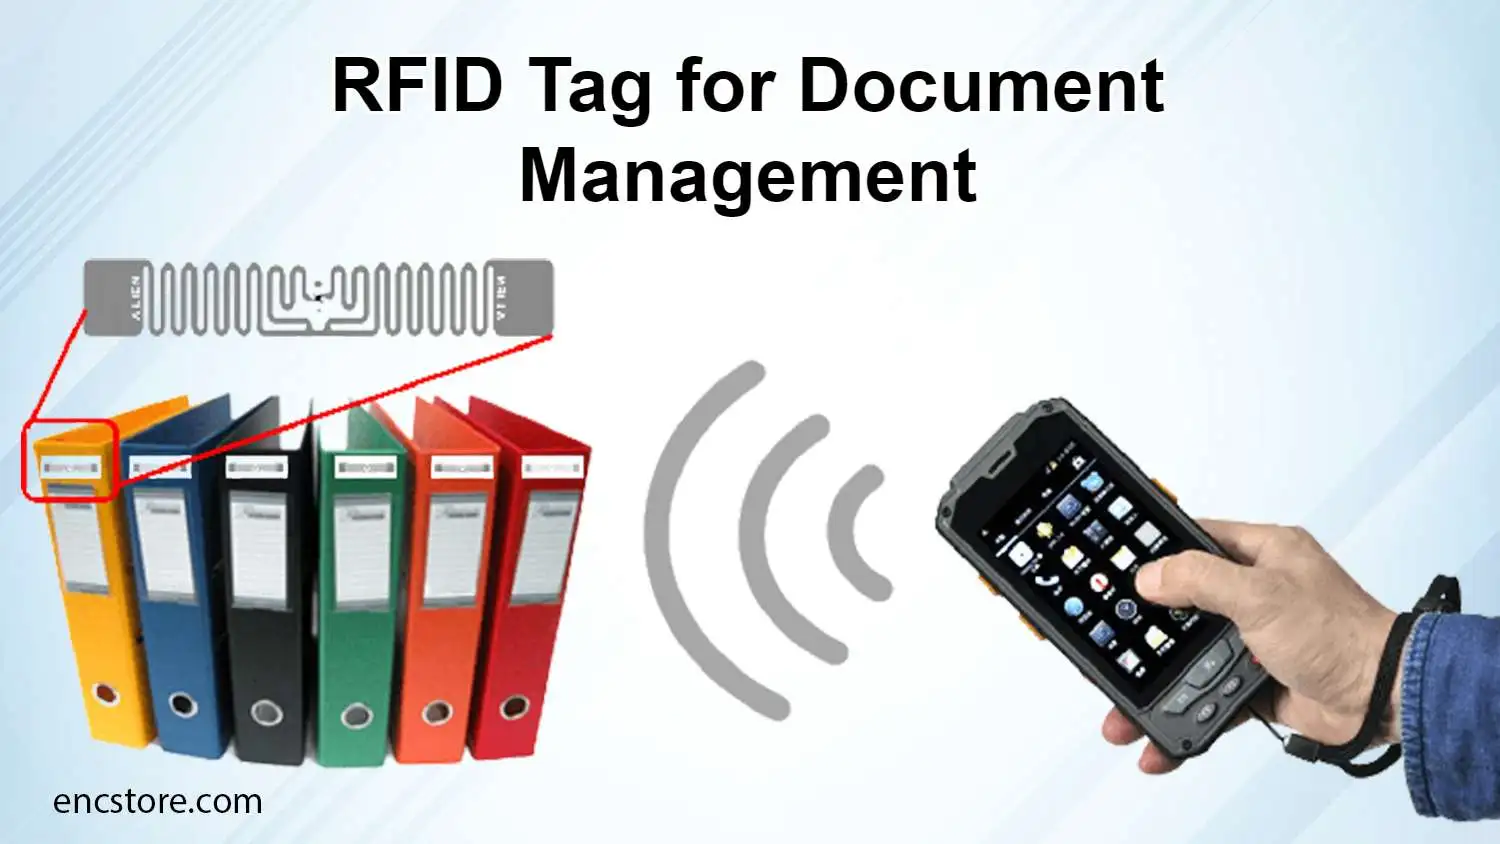 RFID Tag for Document Management